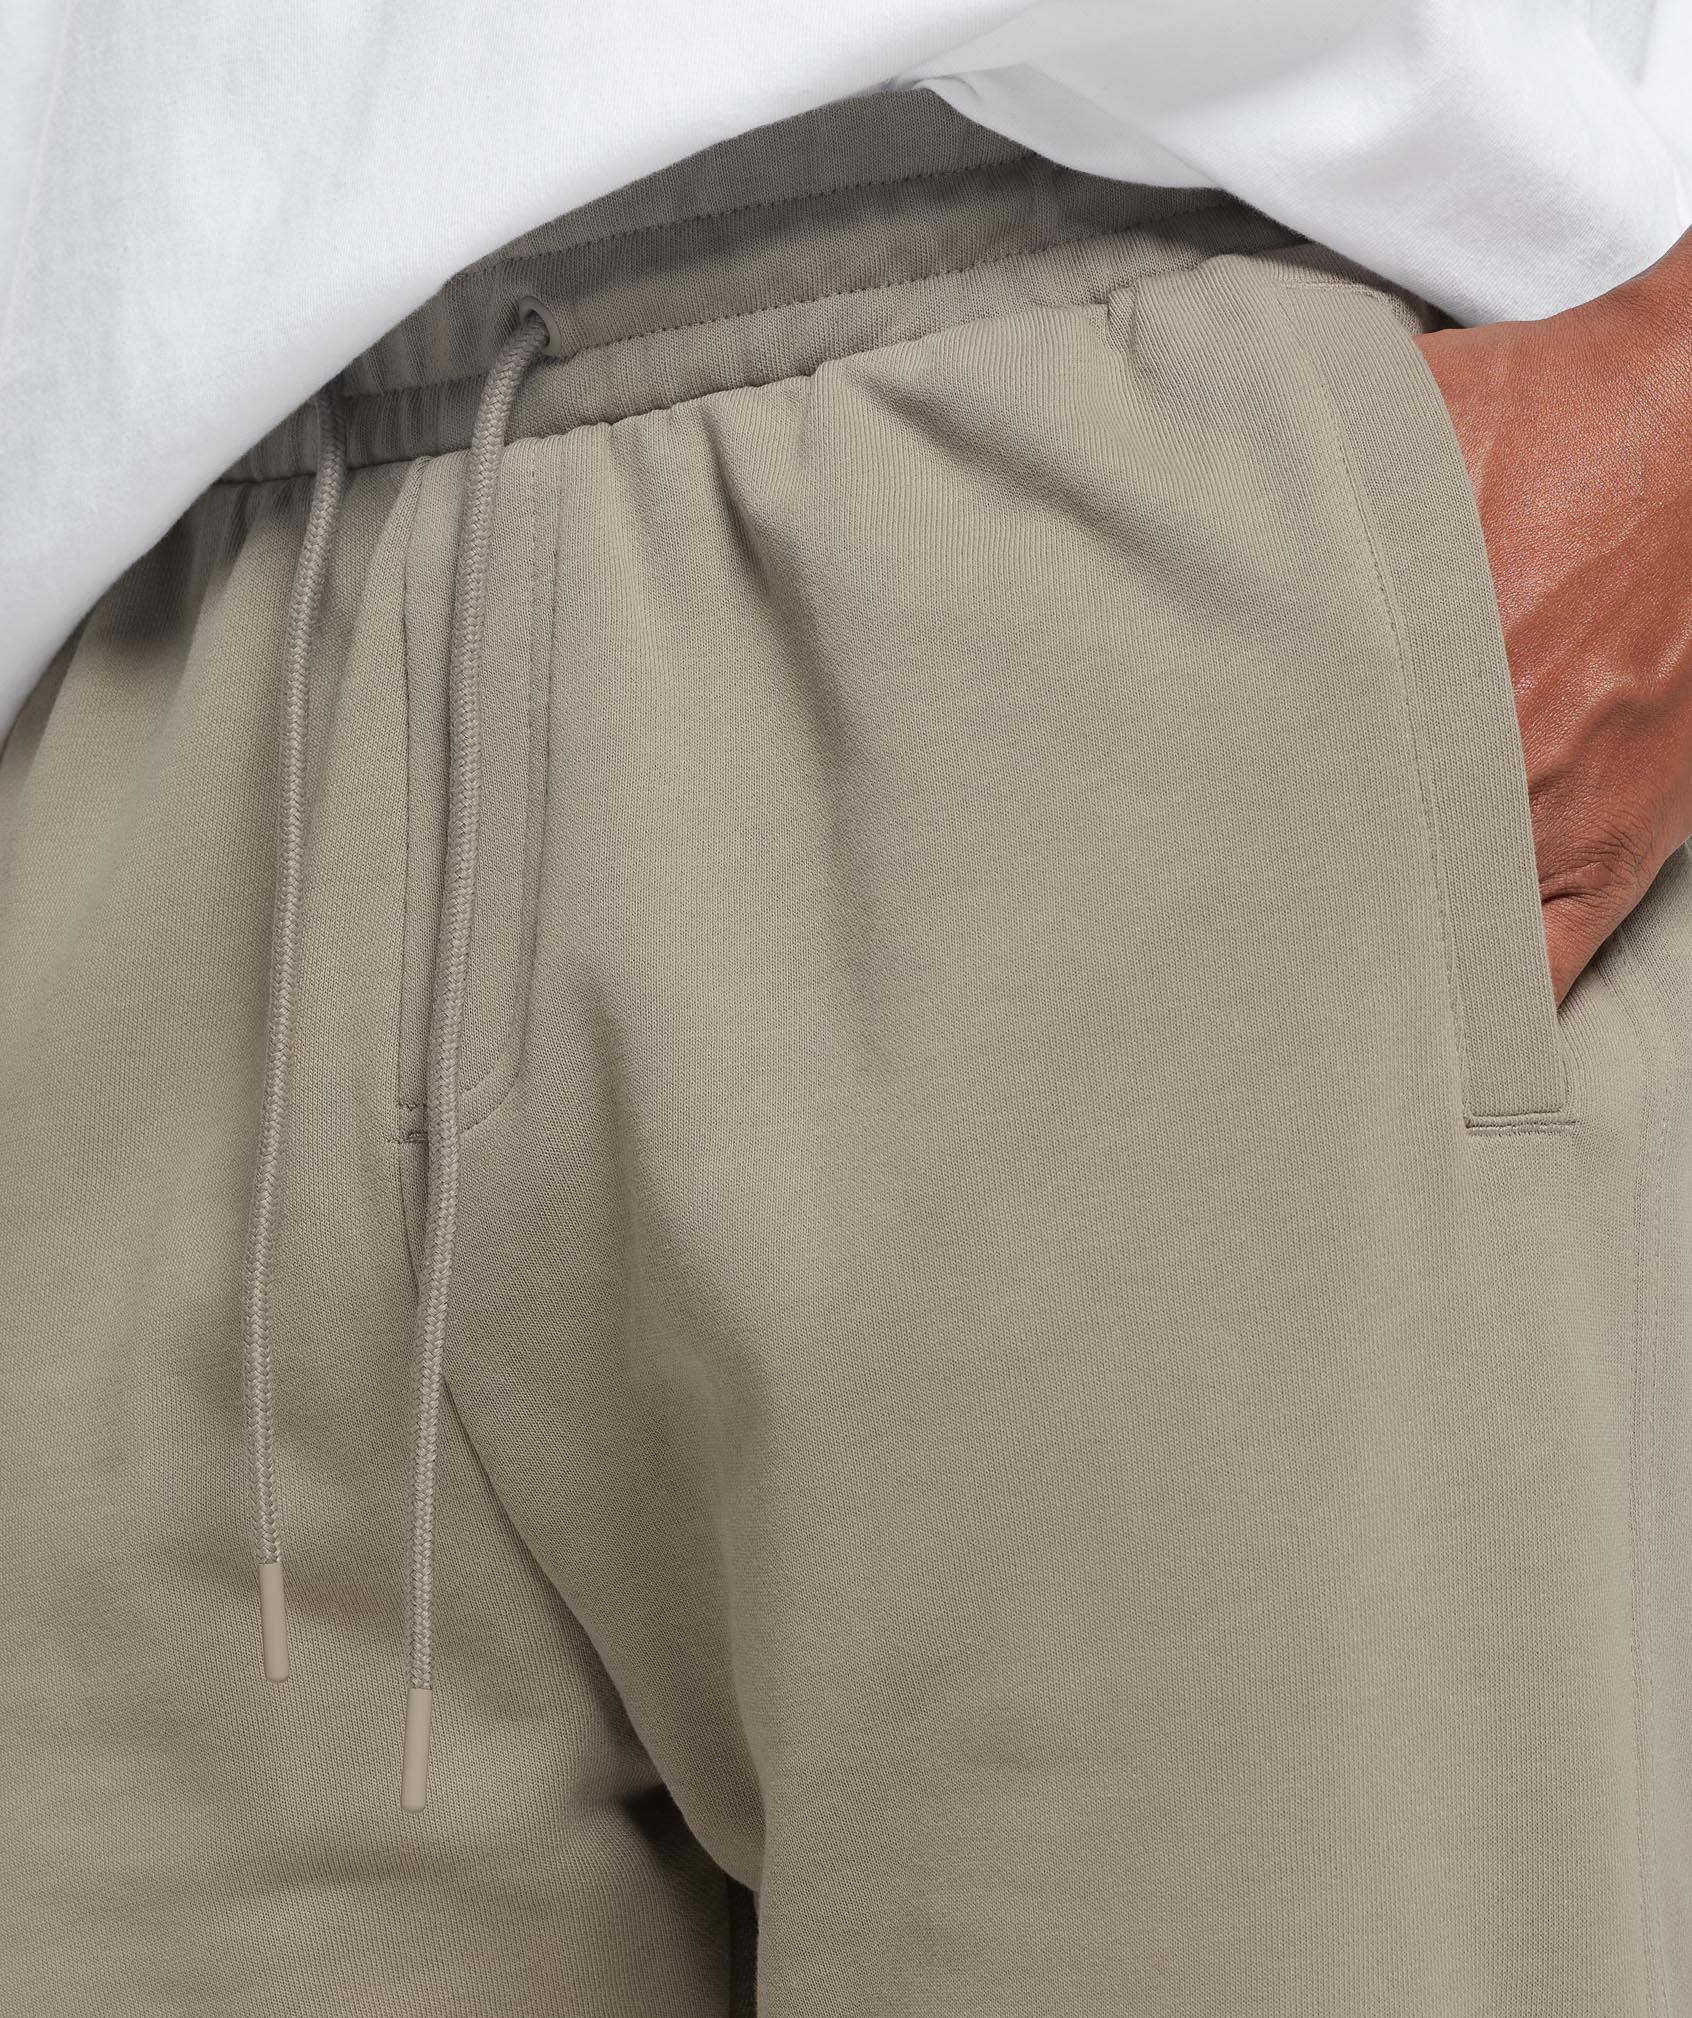 Rest Day Essentials Joggers in Linen Brown - view 4